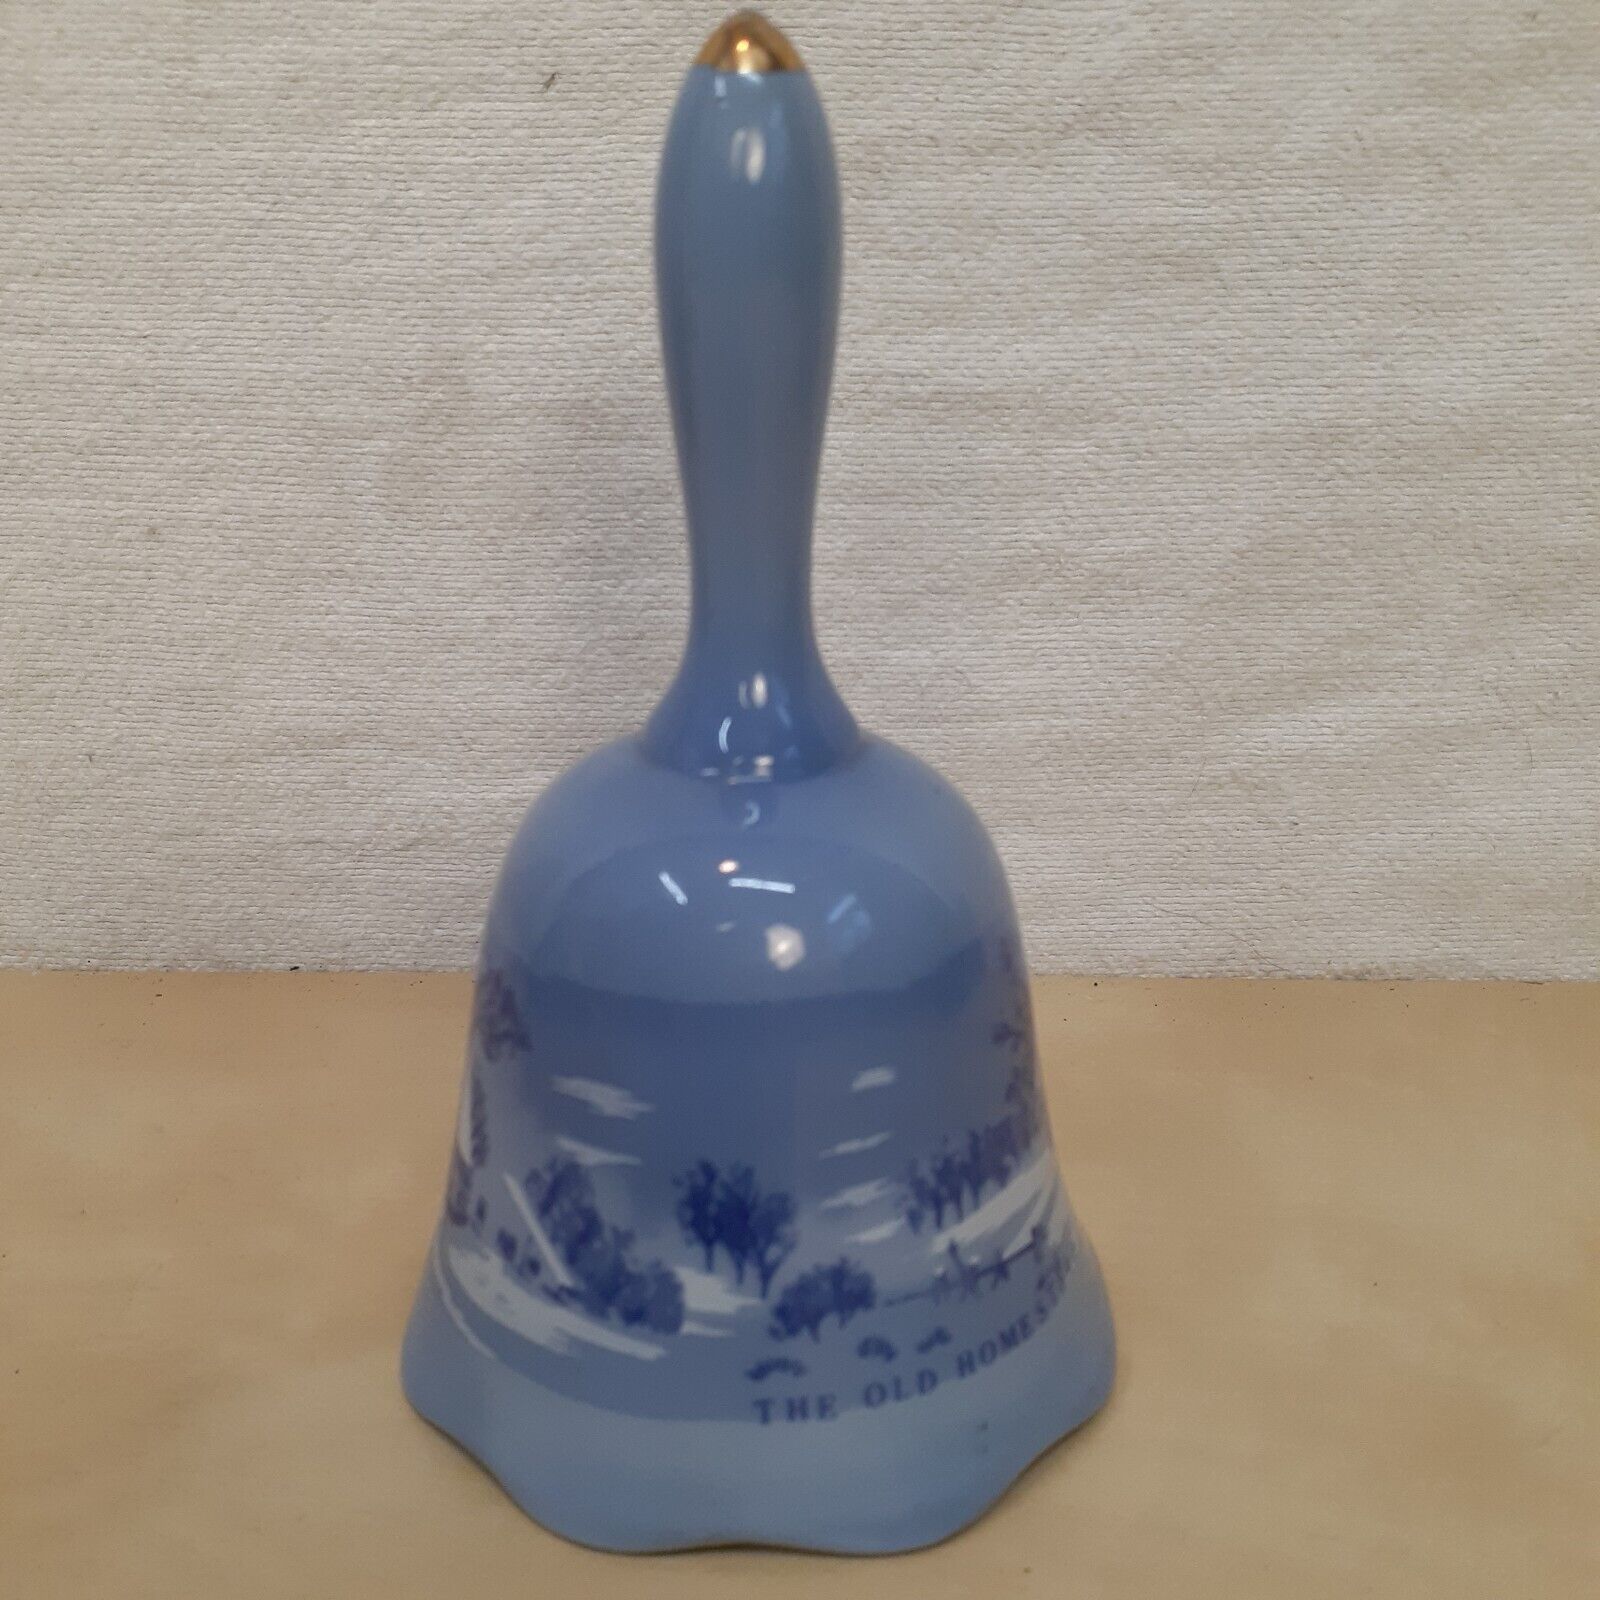 CURRIER & IVES-THE OLD HOMESTEAD IN WINTER-BLUE CERAMIC DINNER BELL  BEAUTIFUL